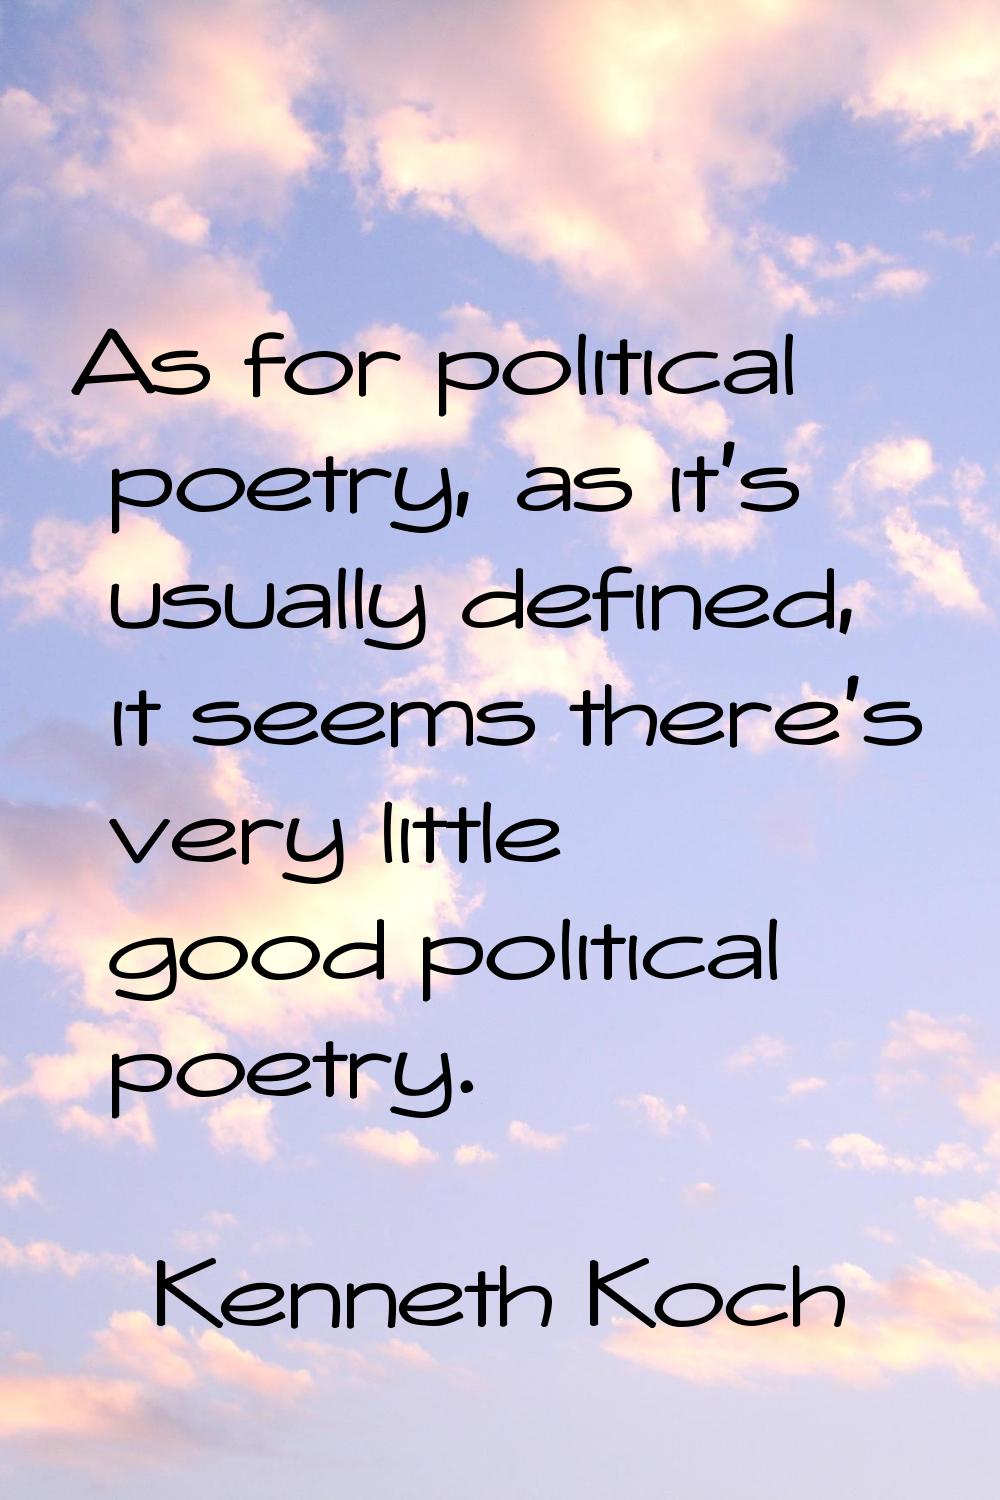 As for political poetry, as it's usually defined, it seems there's very little good political poetr